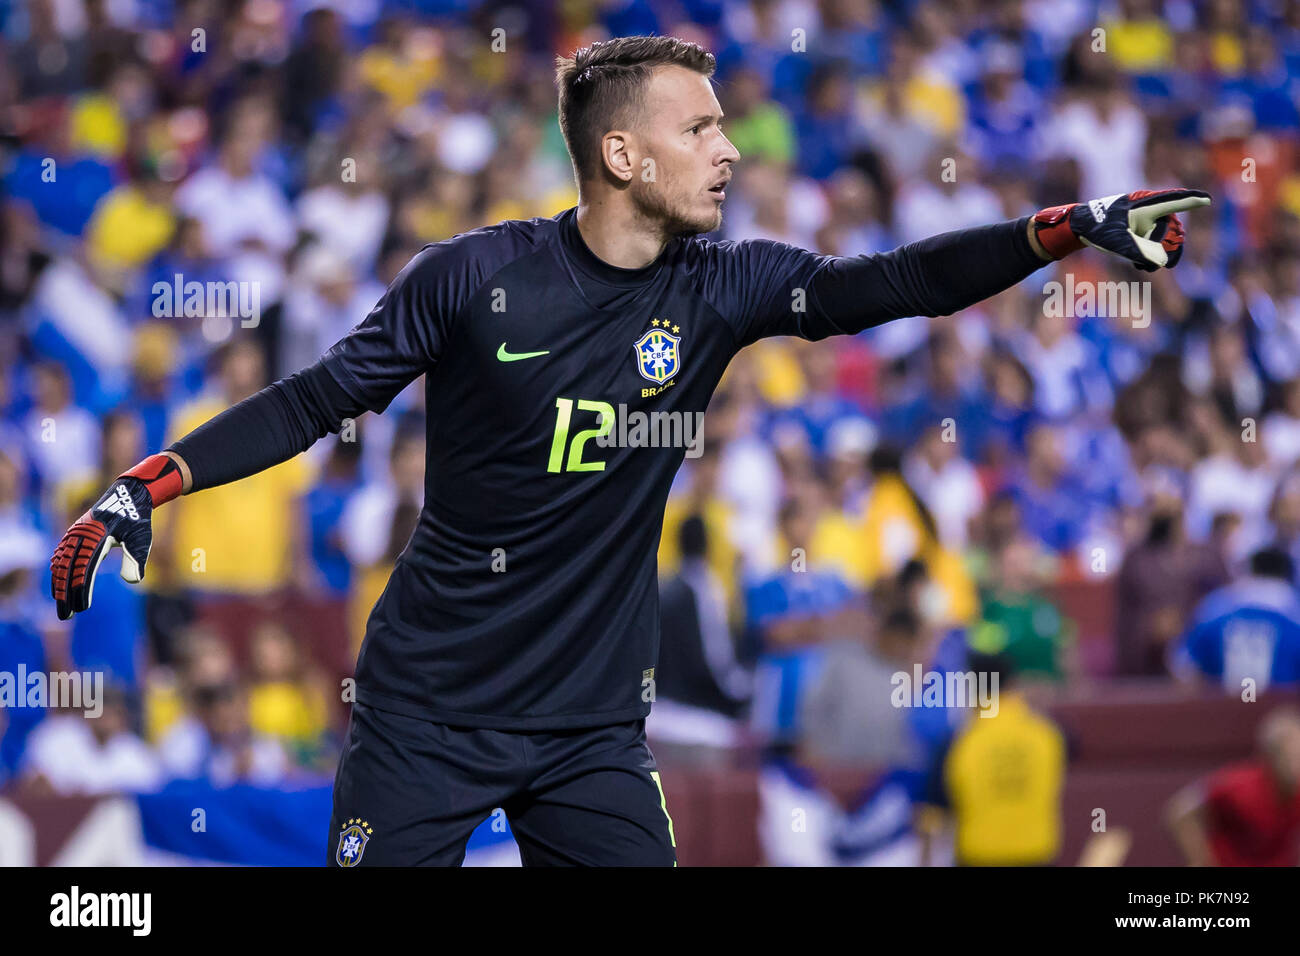 Landover, Maryland, USA. 11th Sep, 2018. Brazil goalkeeper Neto (12) reacts during the second half of an International Friendly match between Brazil and El Salvador at FedExField in Landover, Maryland. Scott Taetsch/CSM/Alamy Live News Stock Photo